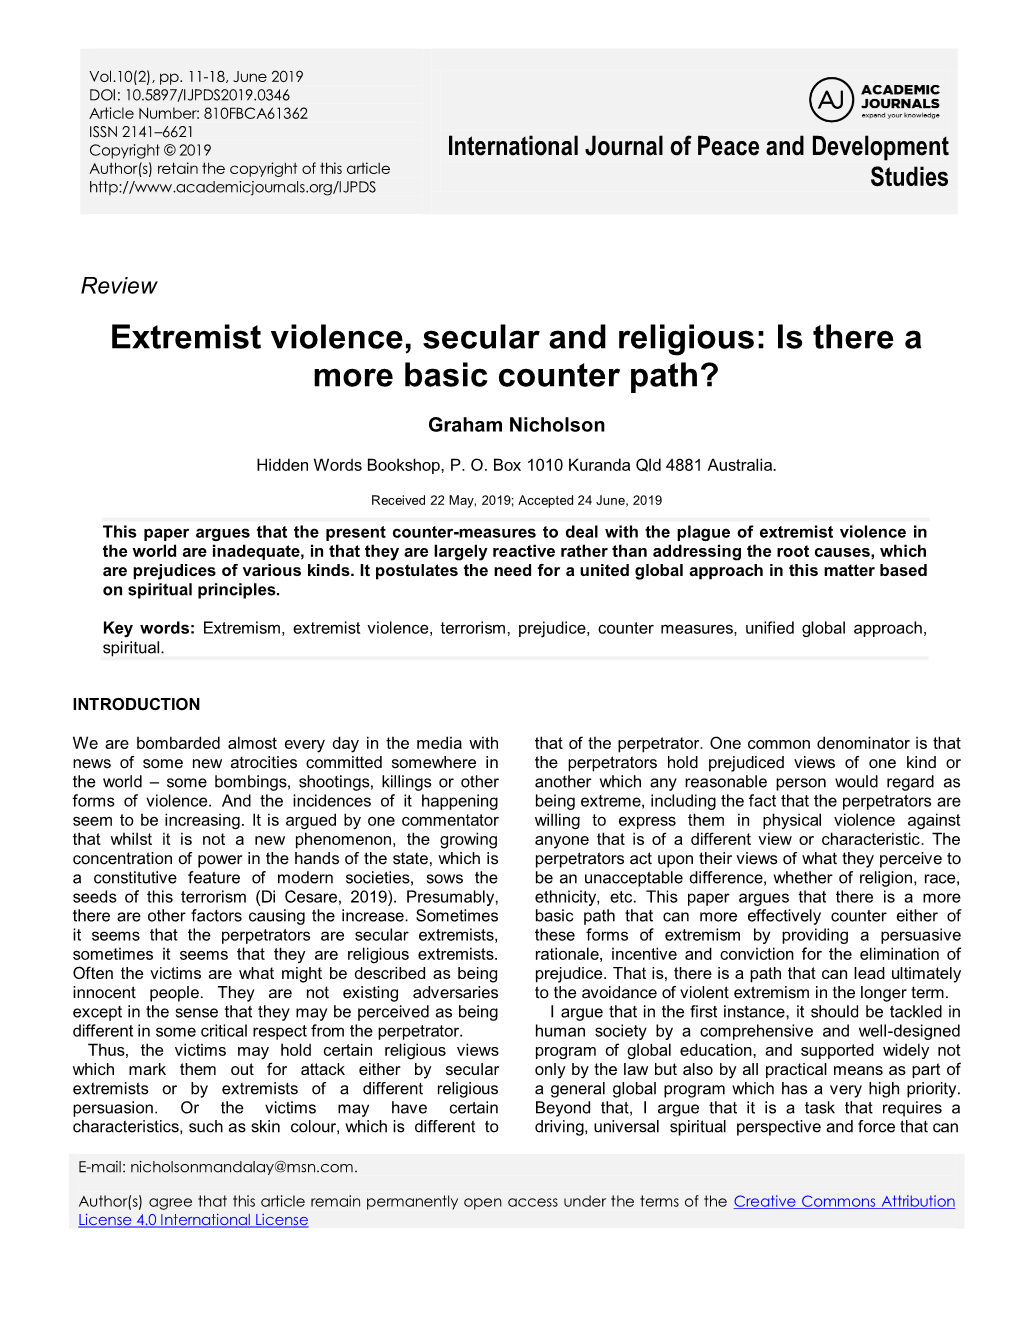 Extremist Violence, Secular and Religious: Is There a More Basic Counter Path?